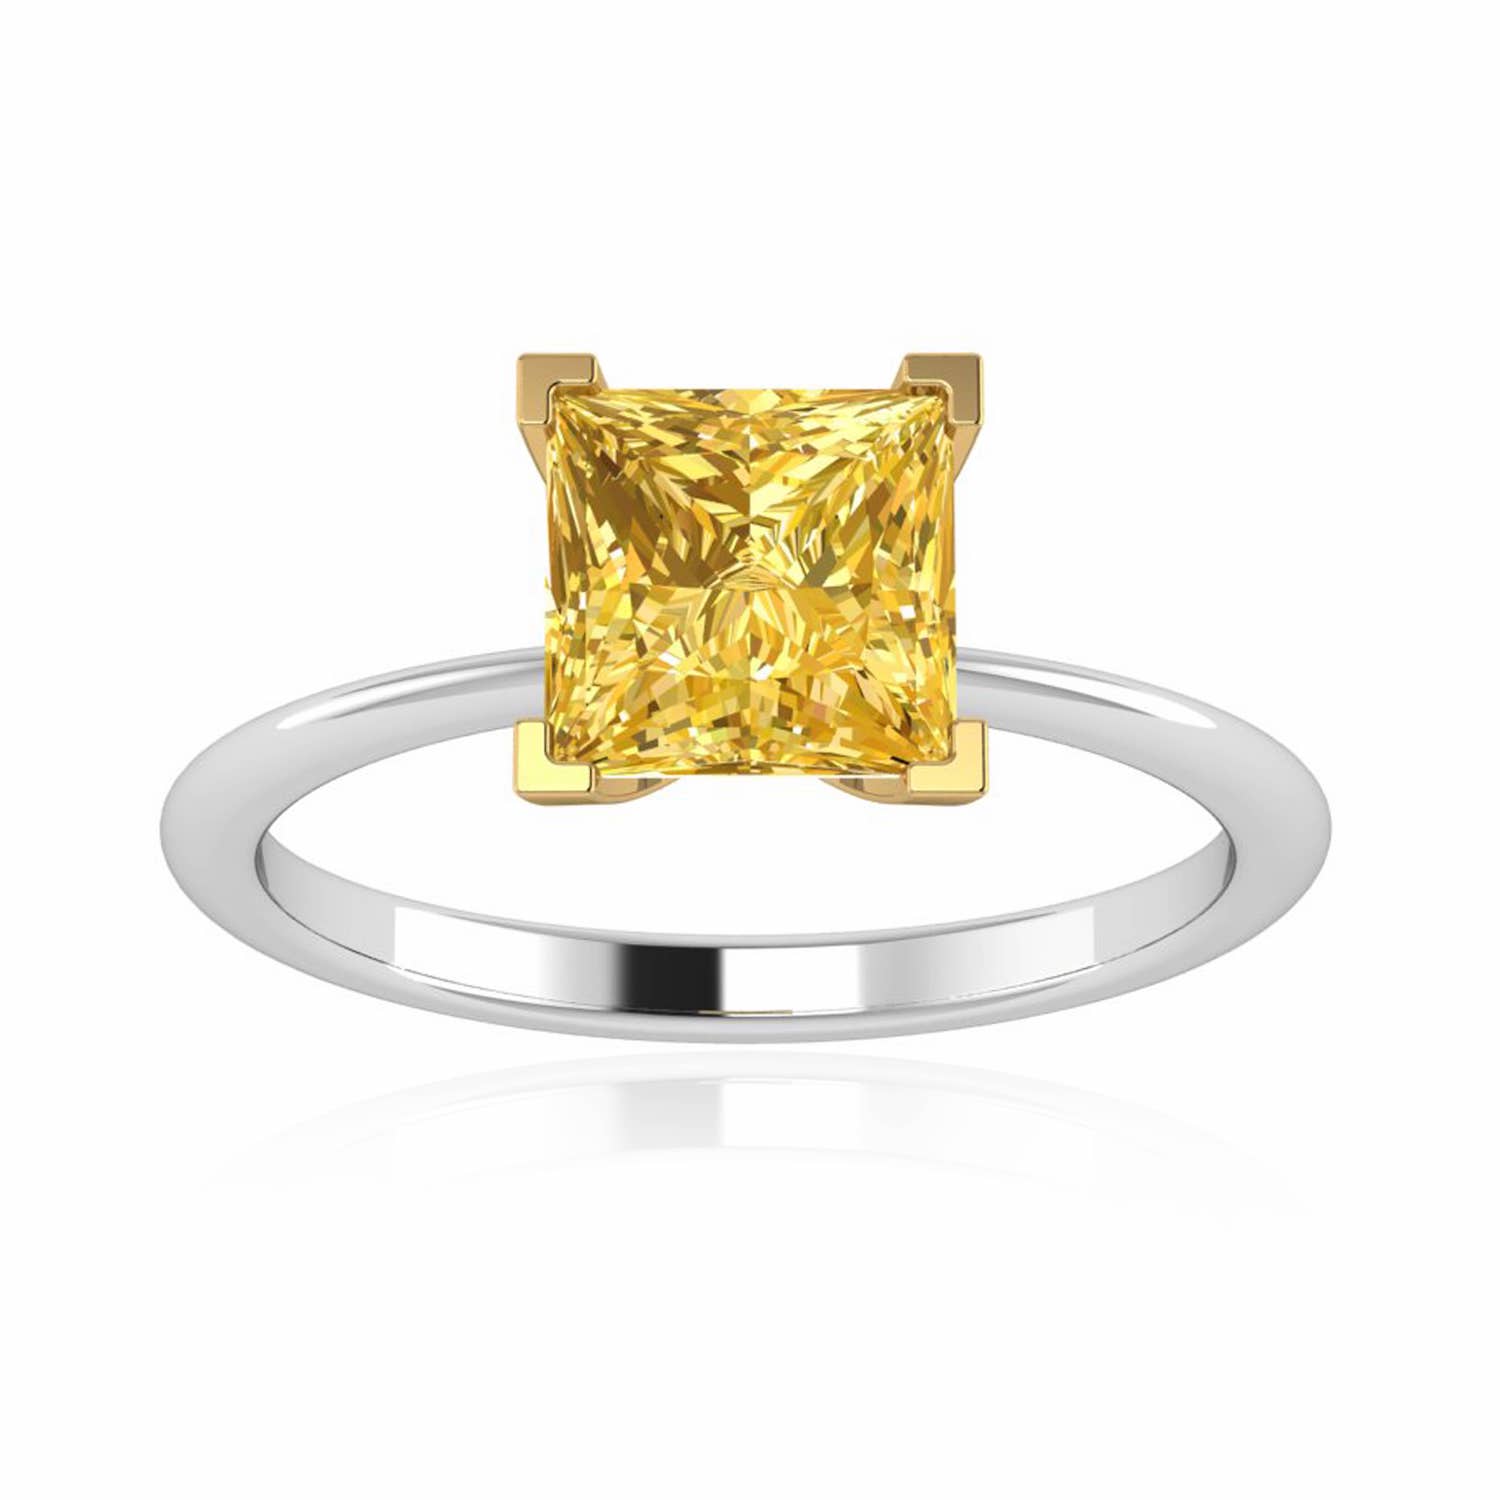 Princess-cut Yellow Diamond Ring by Digamma Collection – HermiaDiamonds